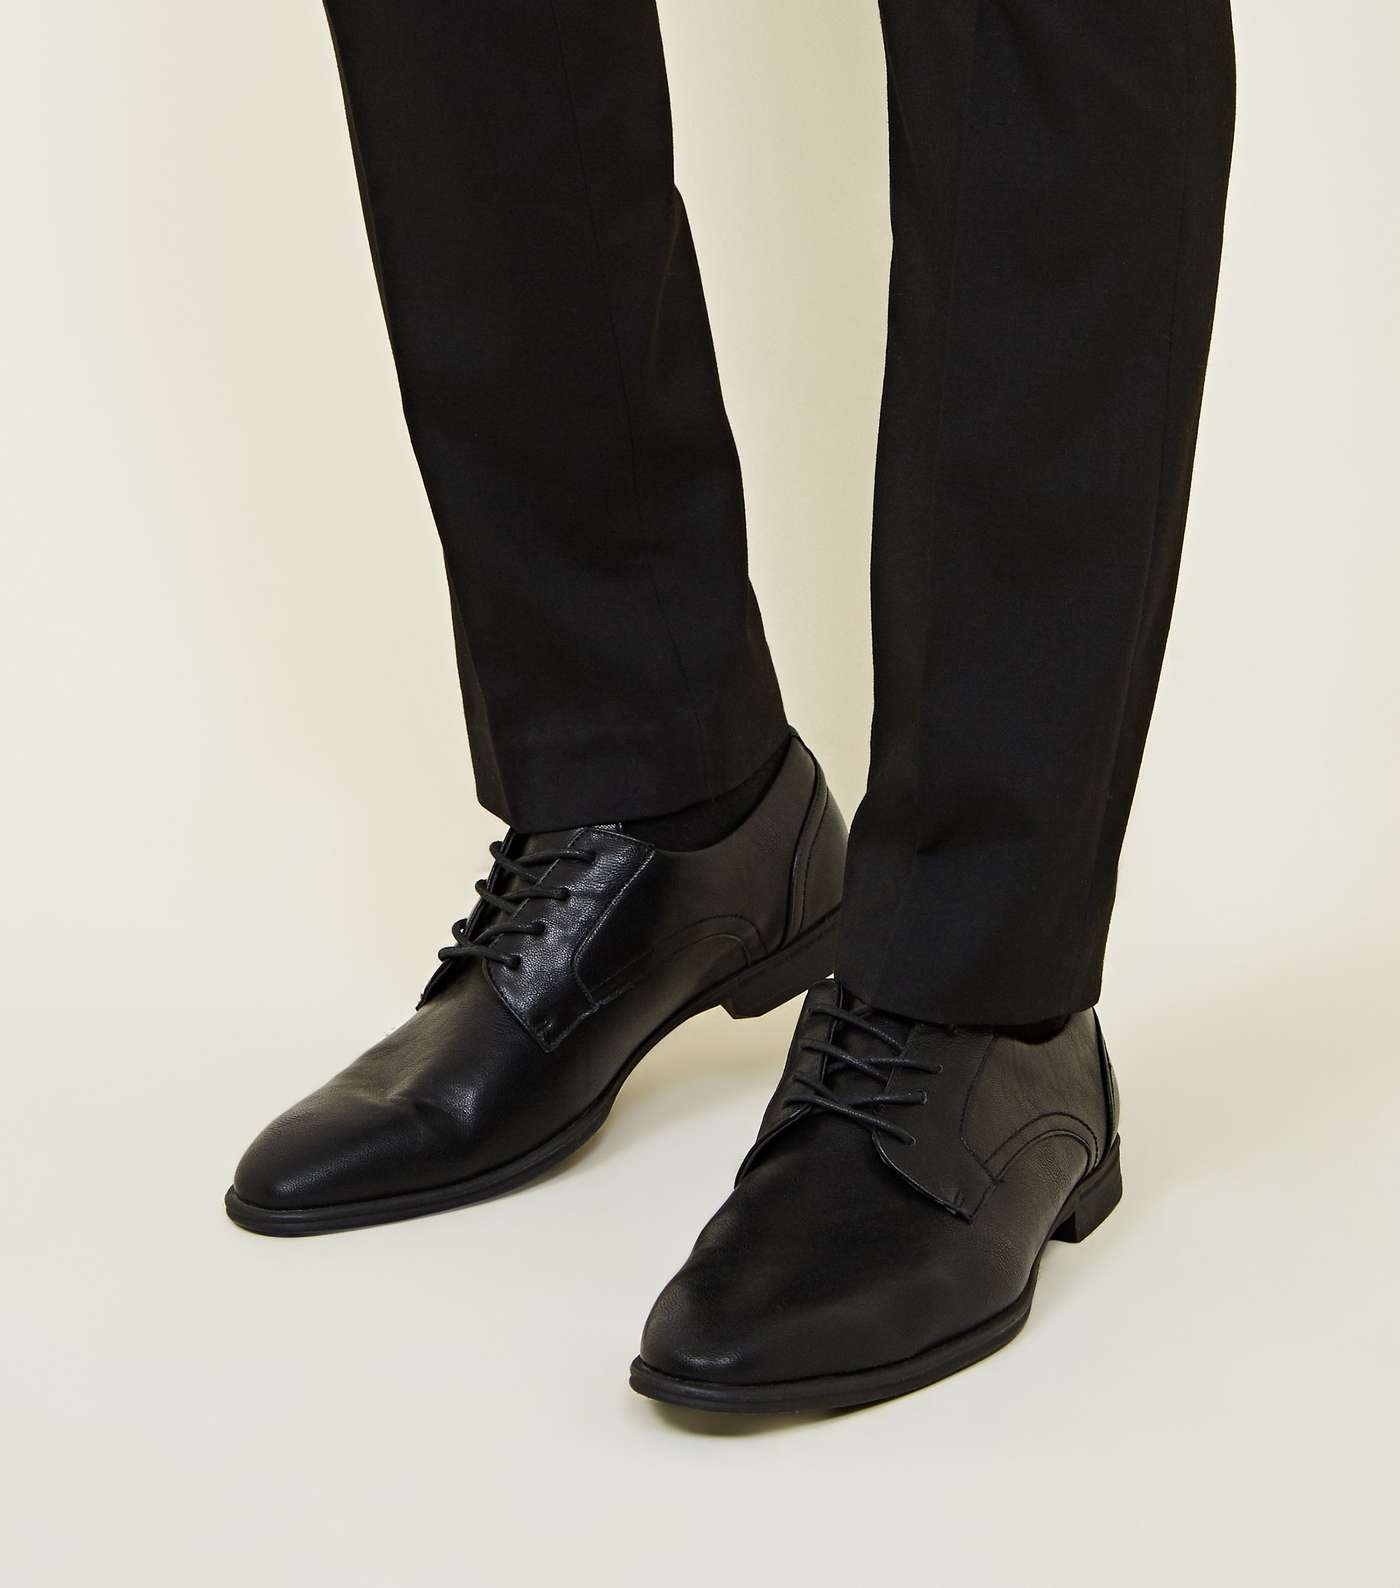 Black Leather-Look Formal Shoes